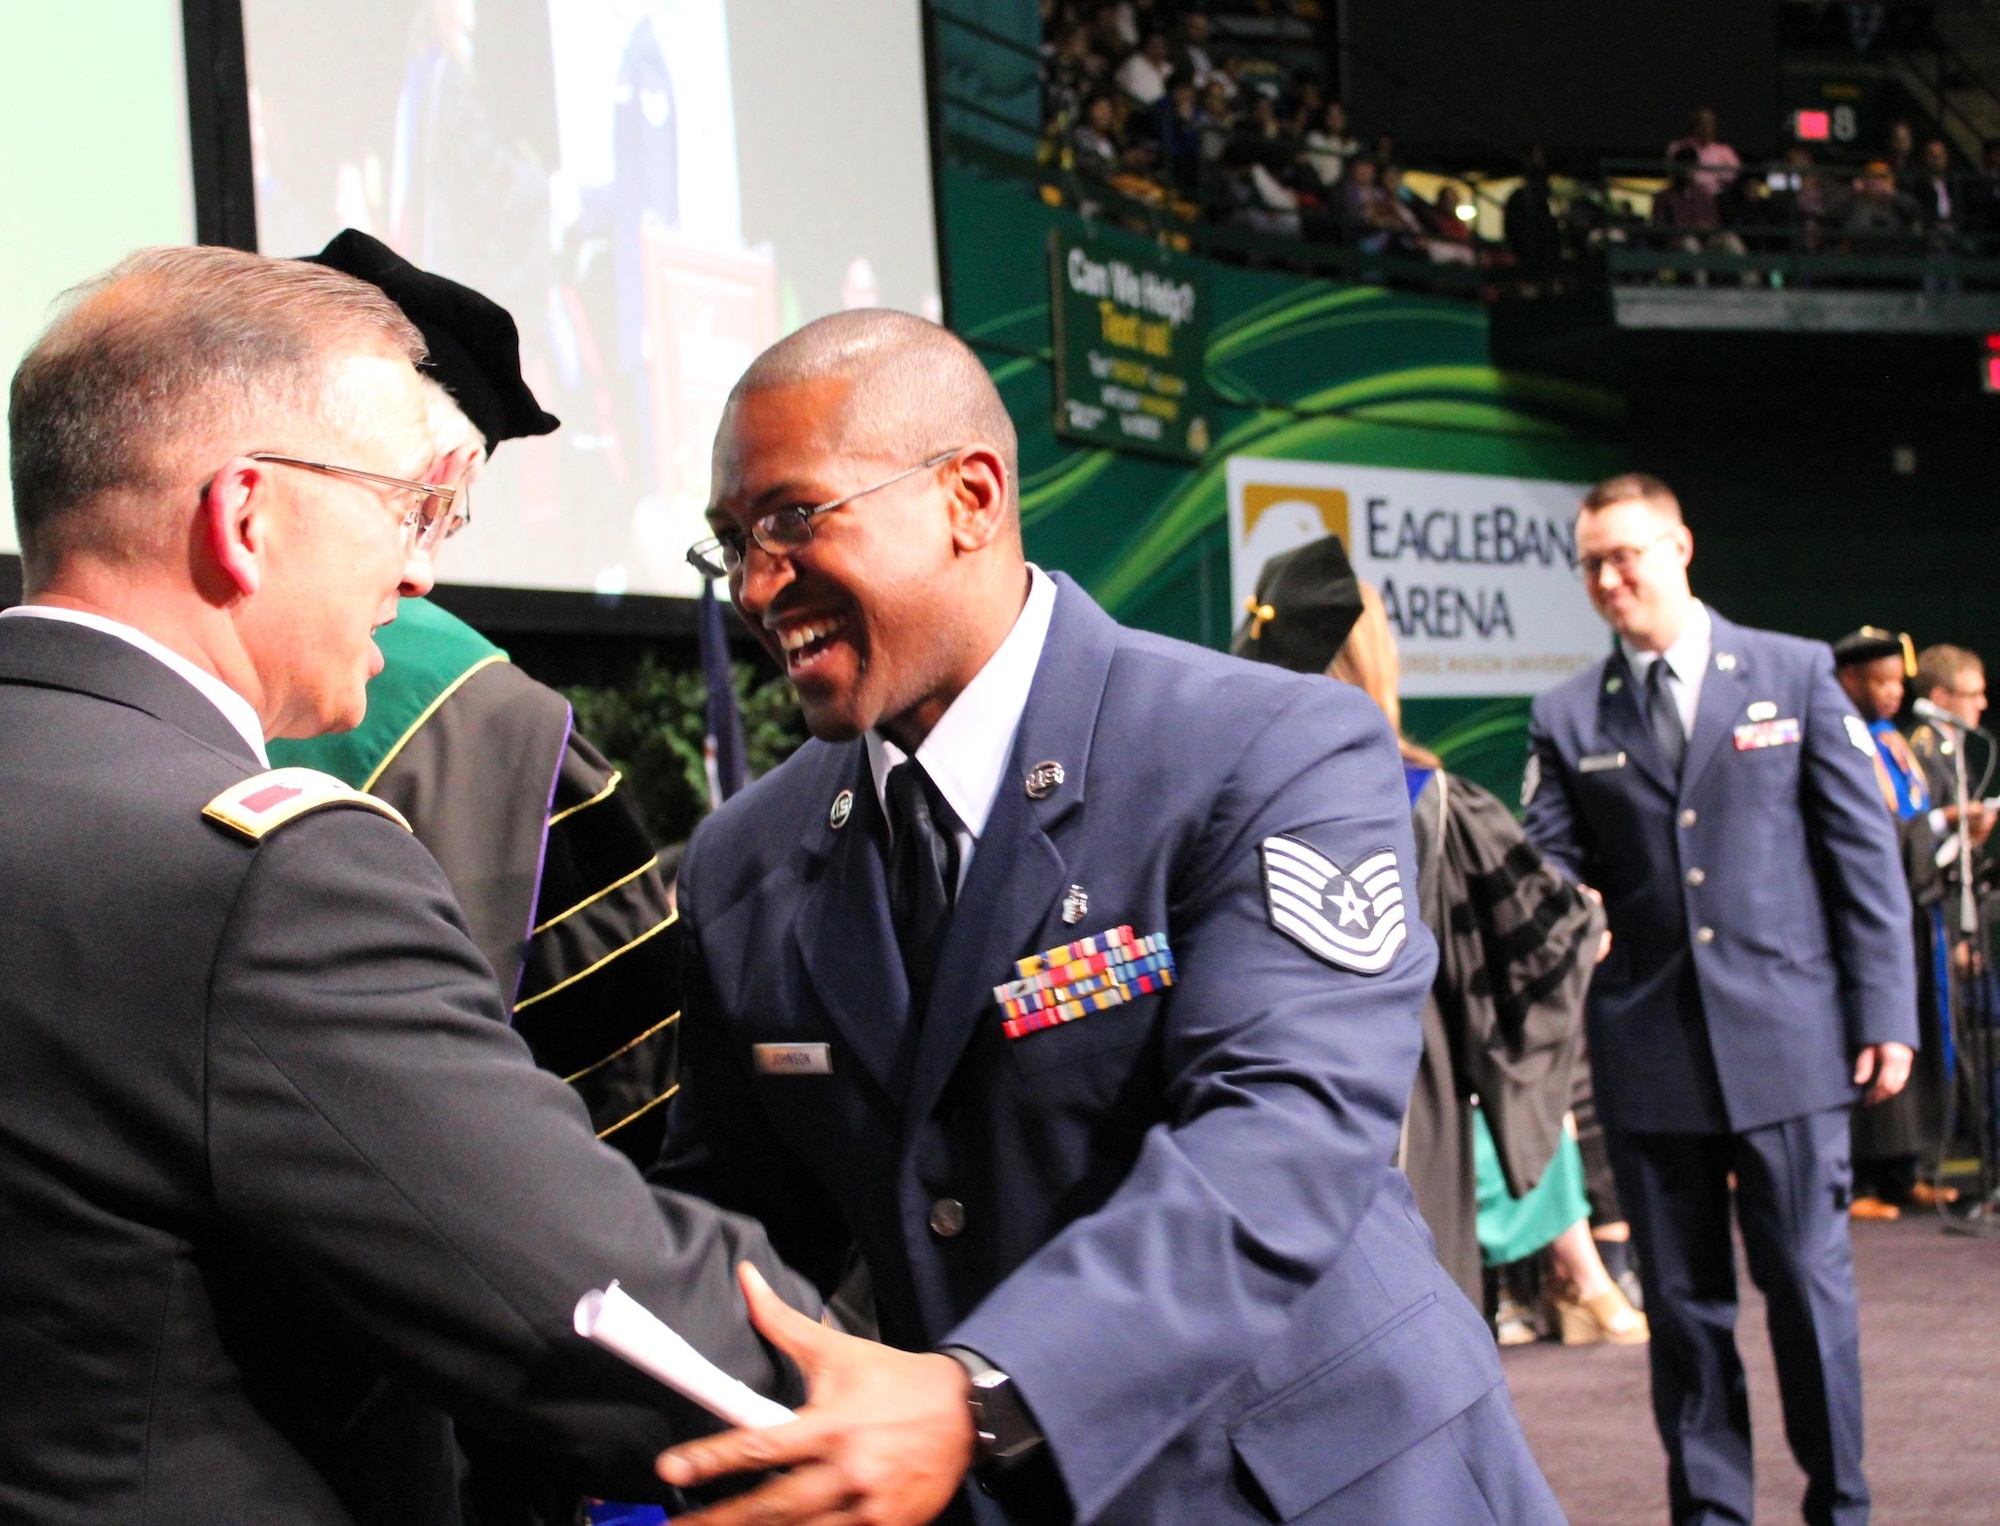 Tech. Sgt. Kenneth Johnson crosses the stage at a commencement ceremony held at George Mason University on May 11, 2016, as he graduates from the Enlisted to Medical Degree Preparatory Program. The Enlisted to Medical Degree Preparatory Program is a partnership between the Armed Services and Uniformed Services University. Designed for enlisted service members, the two-year program enables members to remain on active duty status while enrolled as full-time students in preparation for application to medical school. (U.S. Air Force photo by Prerana Korpe, AFMS Public Affairs)